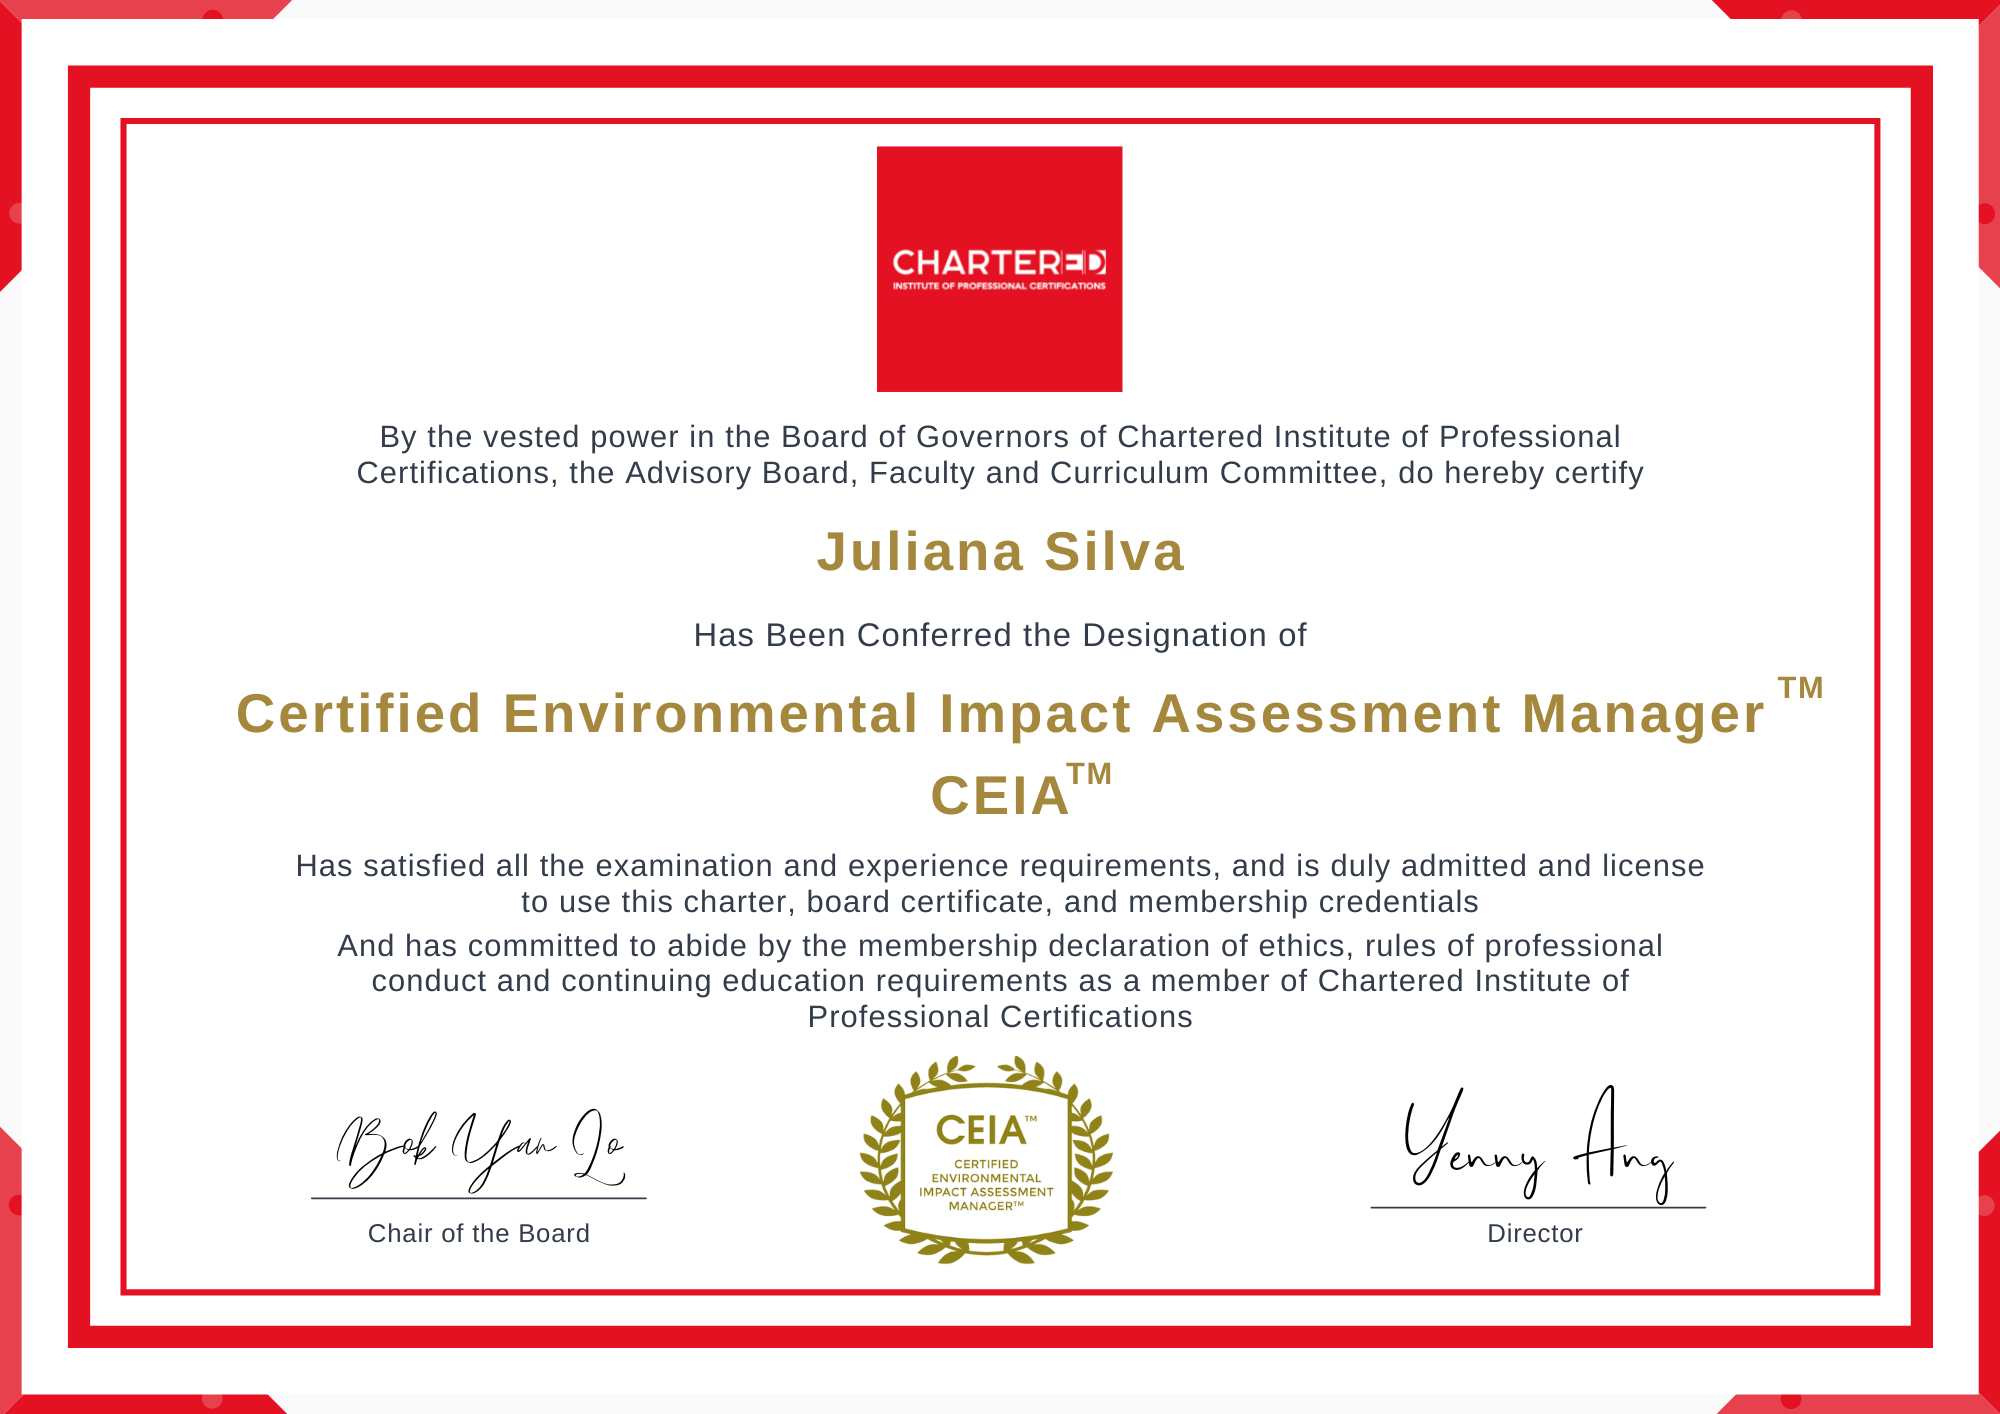 Certified Environmental Impact Assessment Manager (CEIA™) Chartered